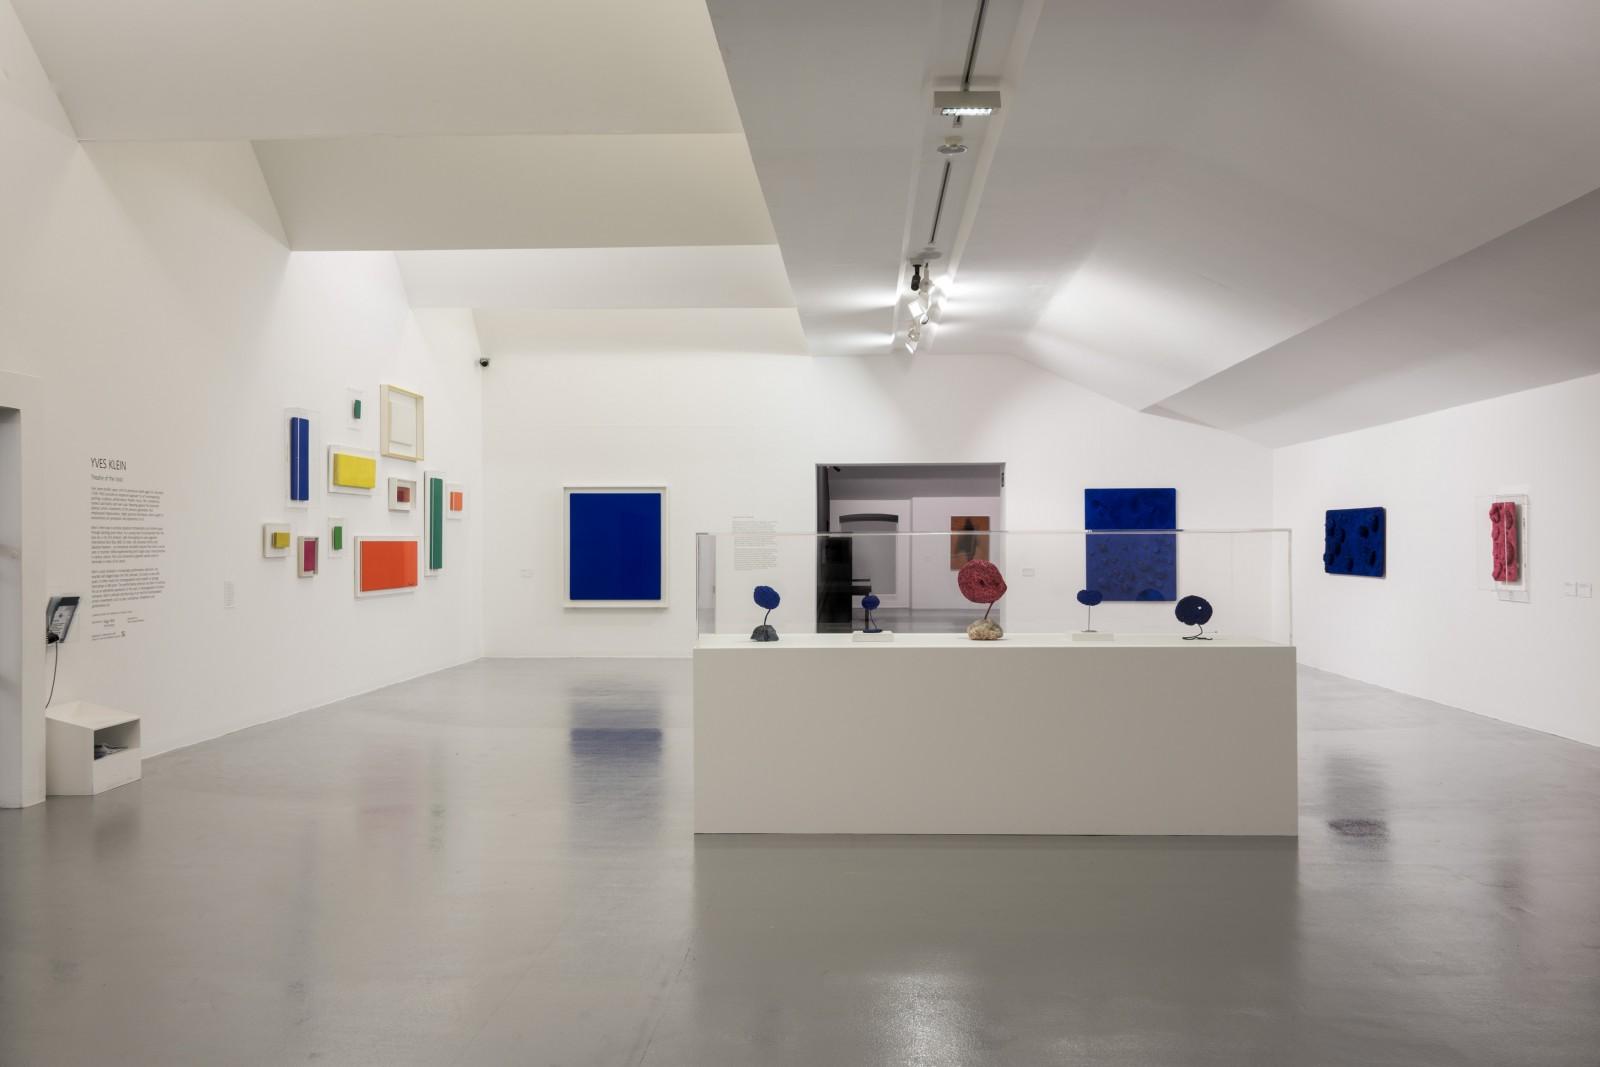 View of the exhibition "Yves Klein - Theatre of the Void", Tate Liverpool, 2016